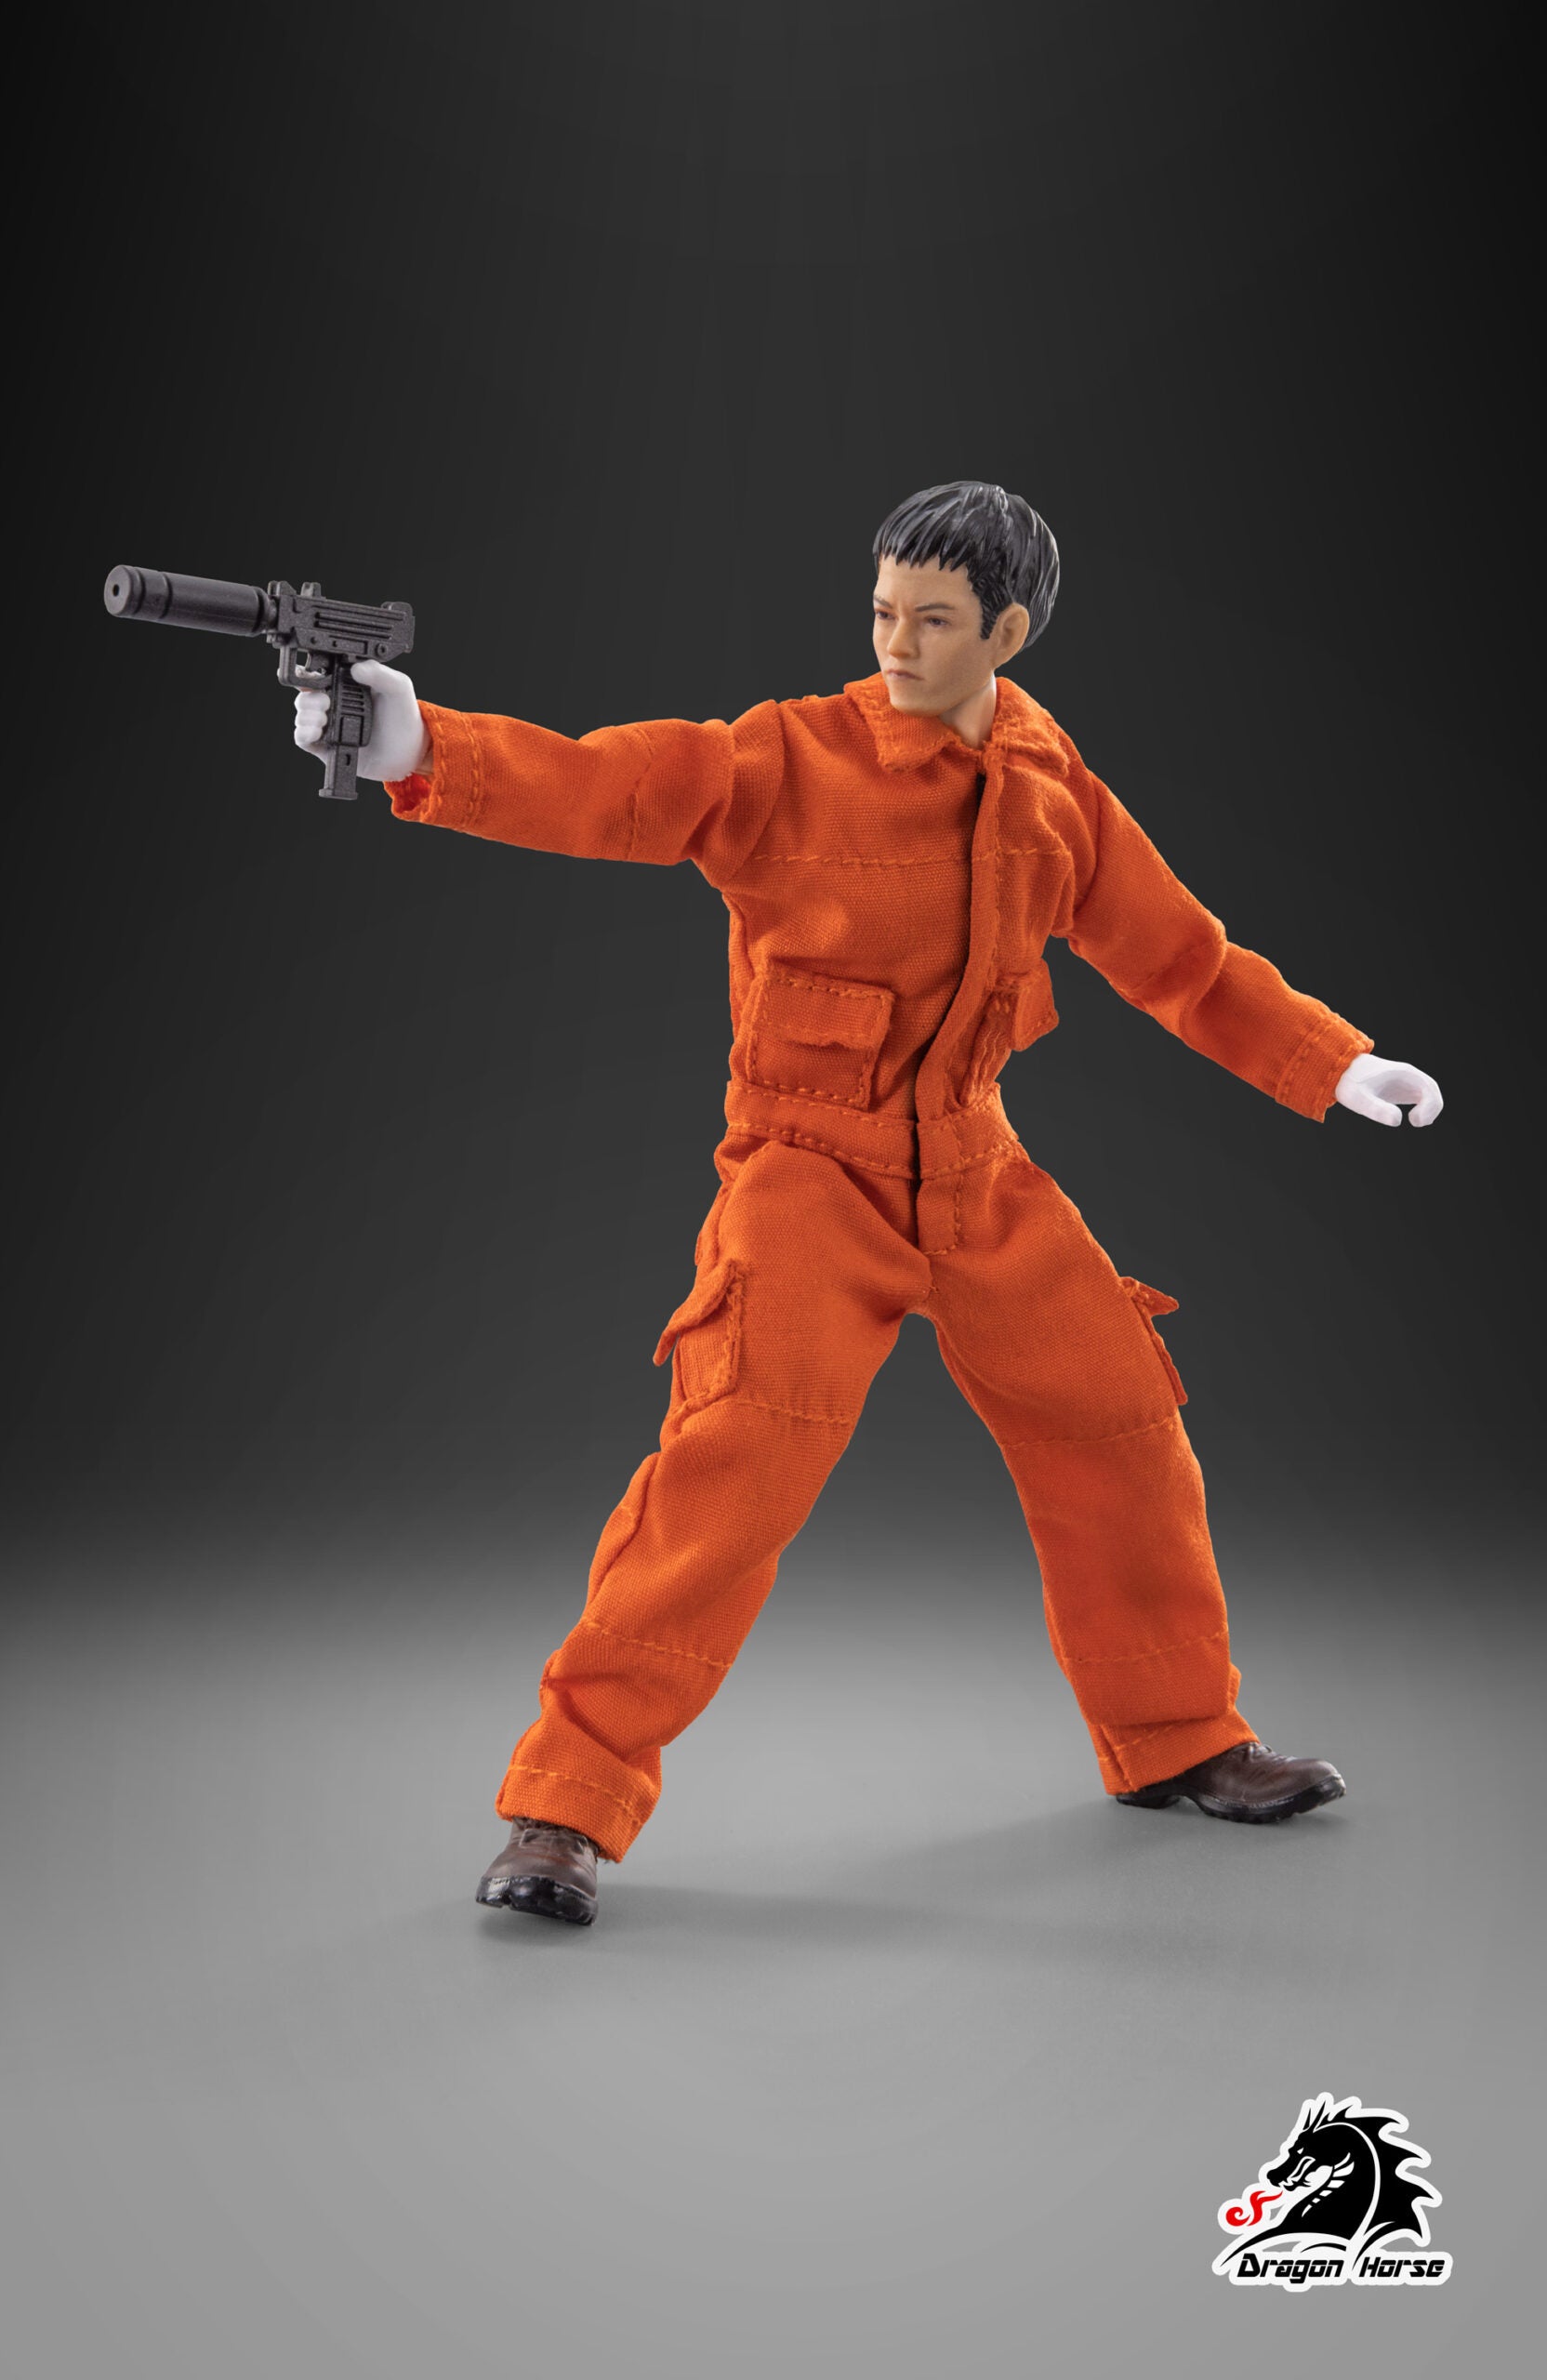 Dragon Horse - DH-S003 - SCP Foundation Series - Class-D Personnel SCP-181 "Lucky" (1/12 Scale) - Marvelous Toys